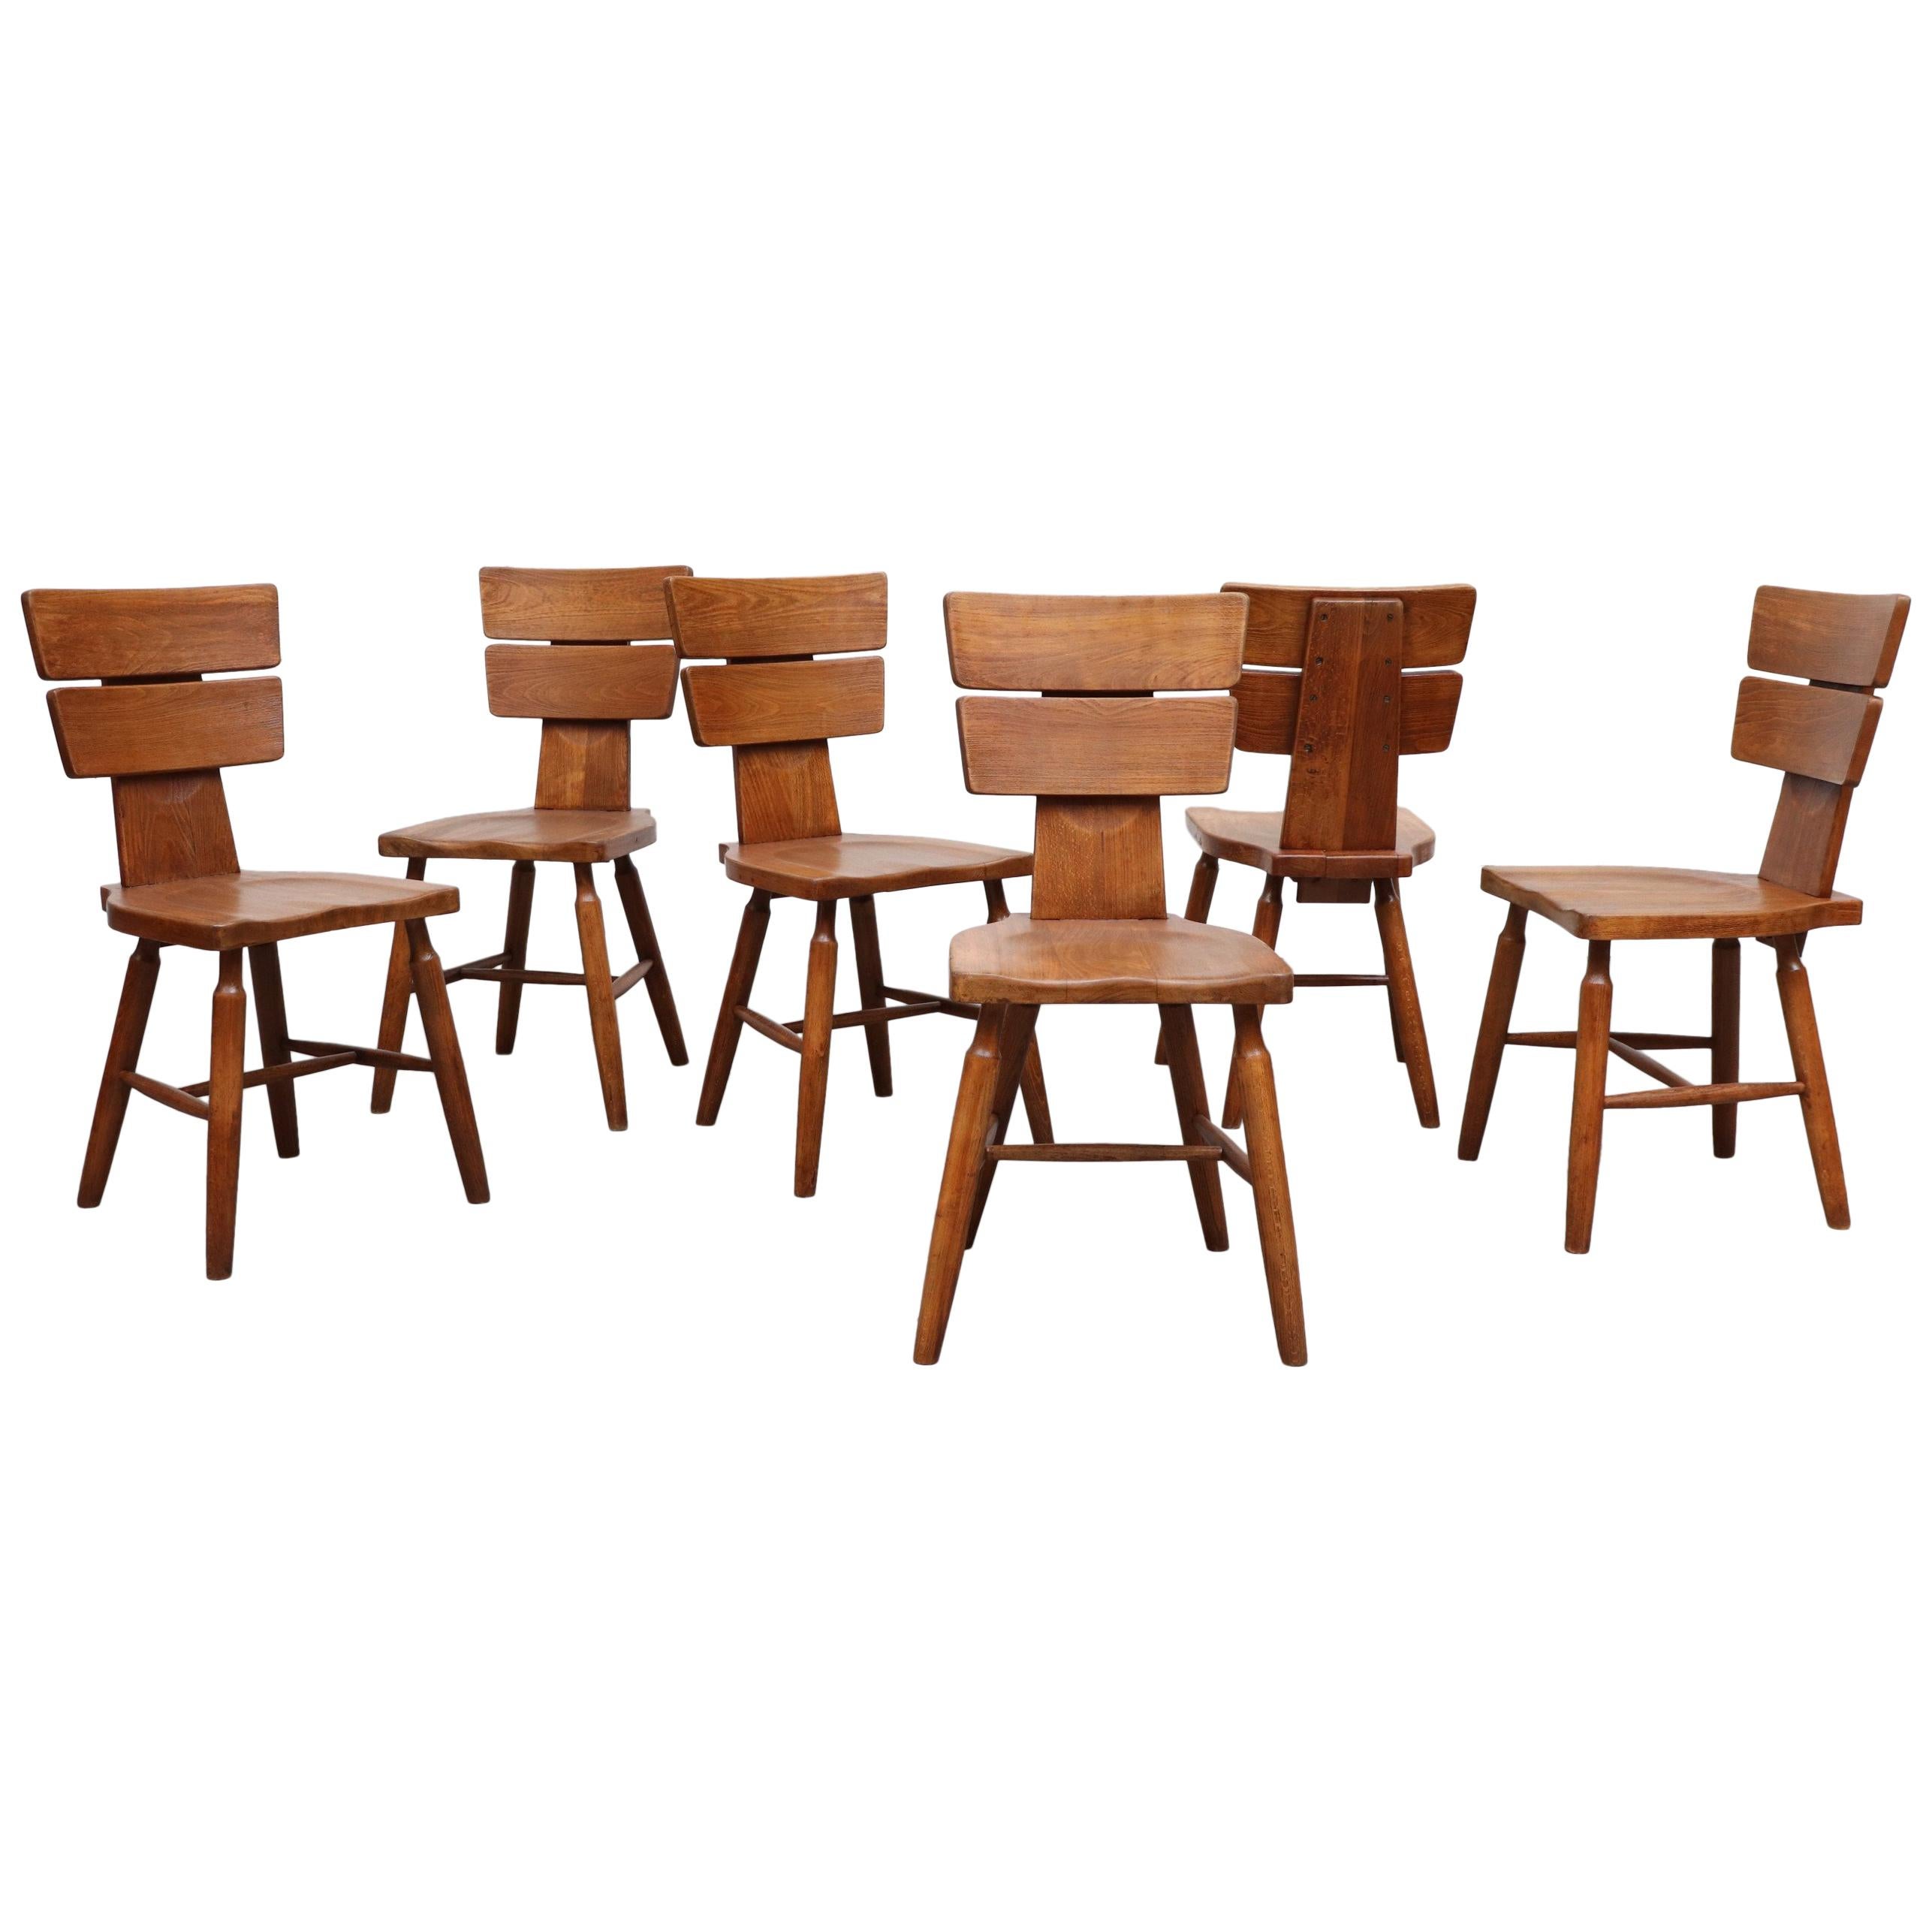 Set of 6 Pierre Chapo Inspired Brutalist Dining Chairs